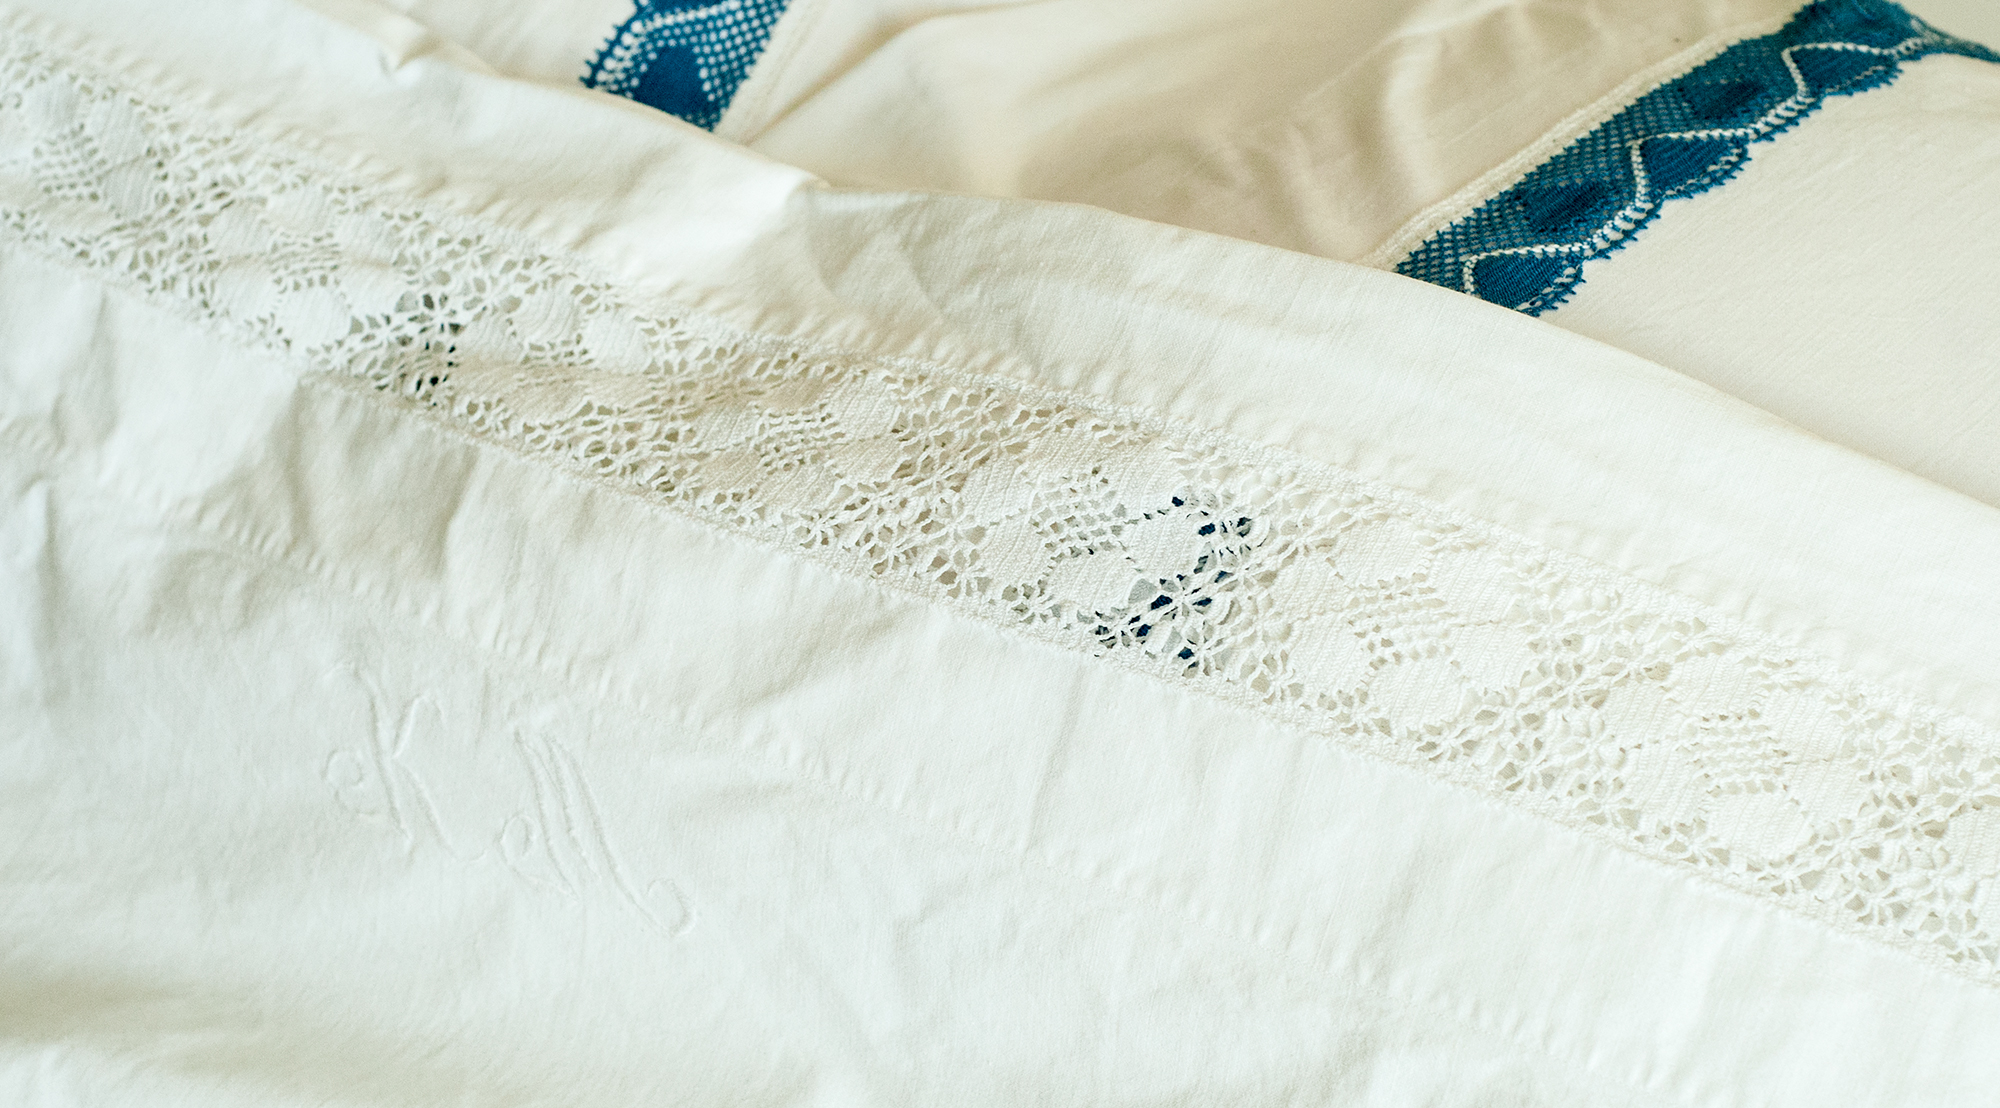 Making your own duvet covers – a tutorial